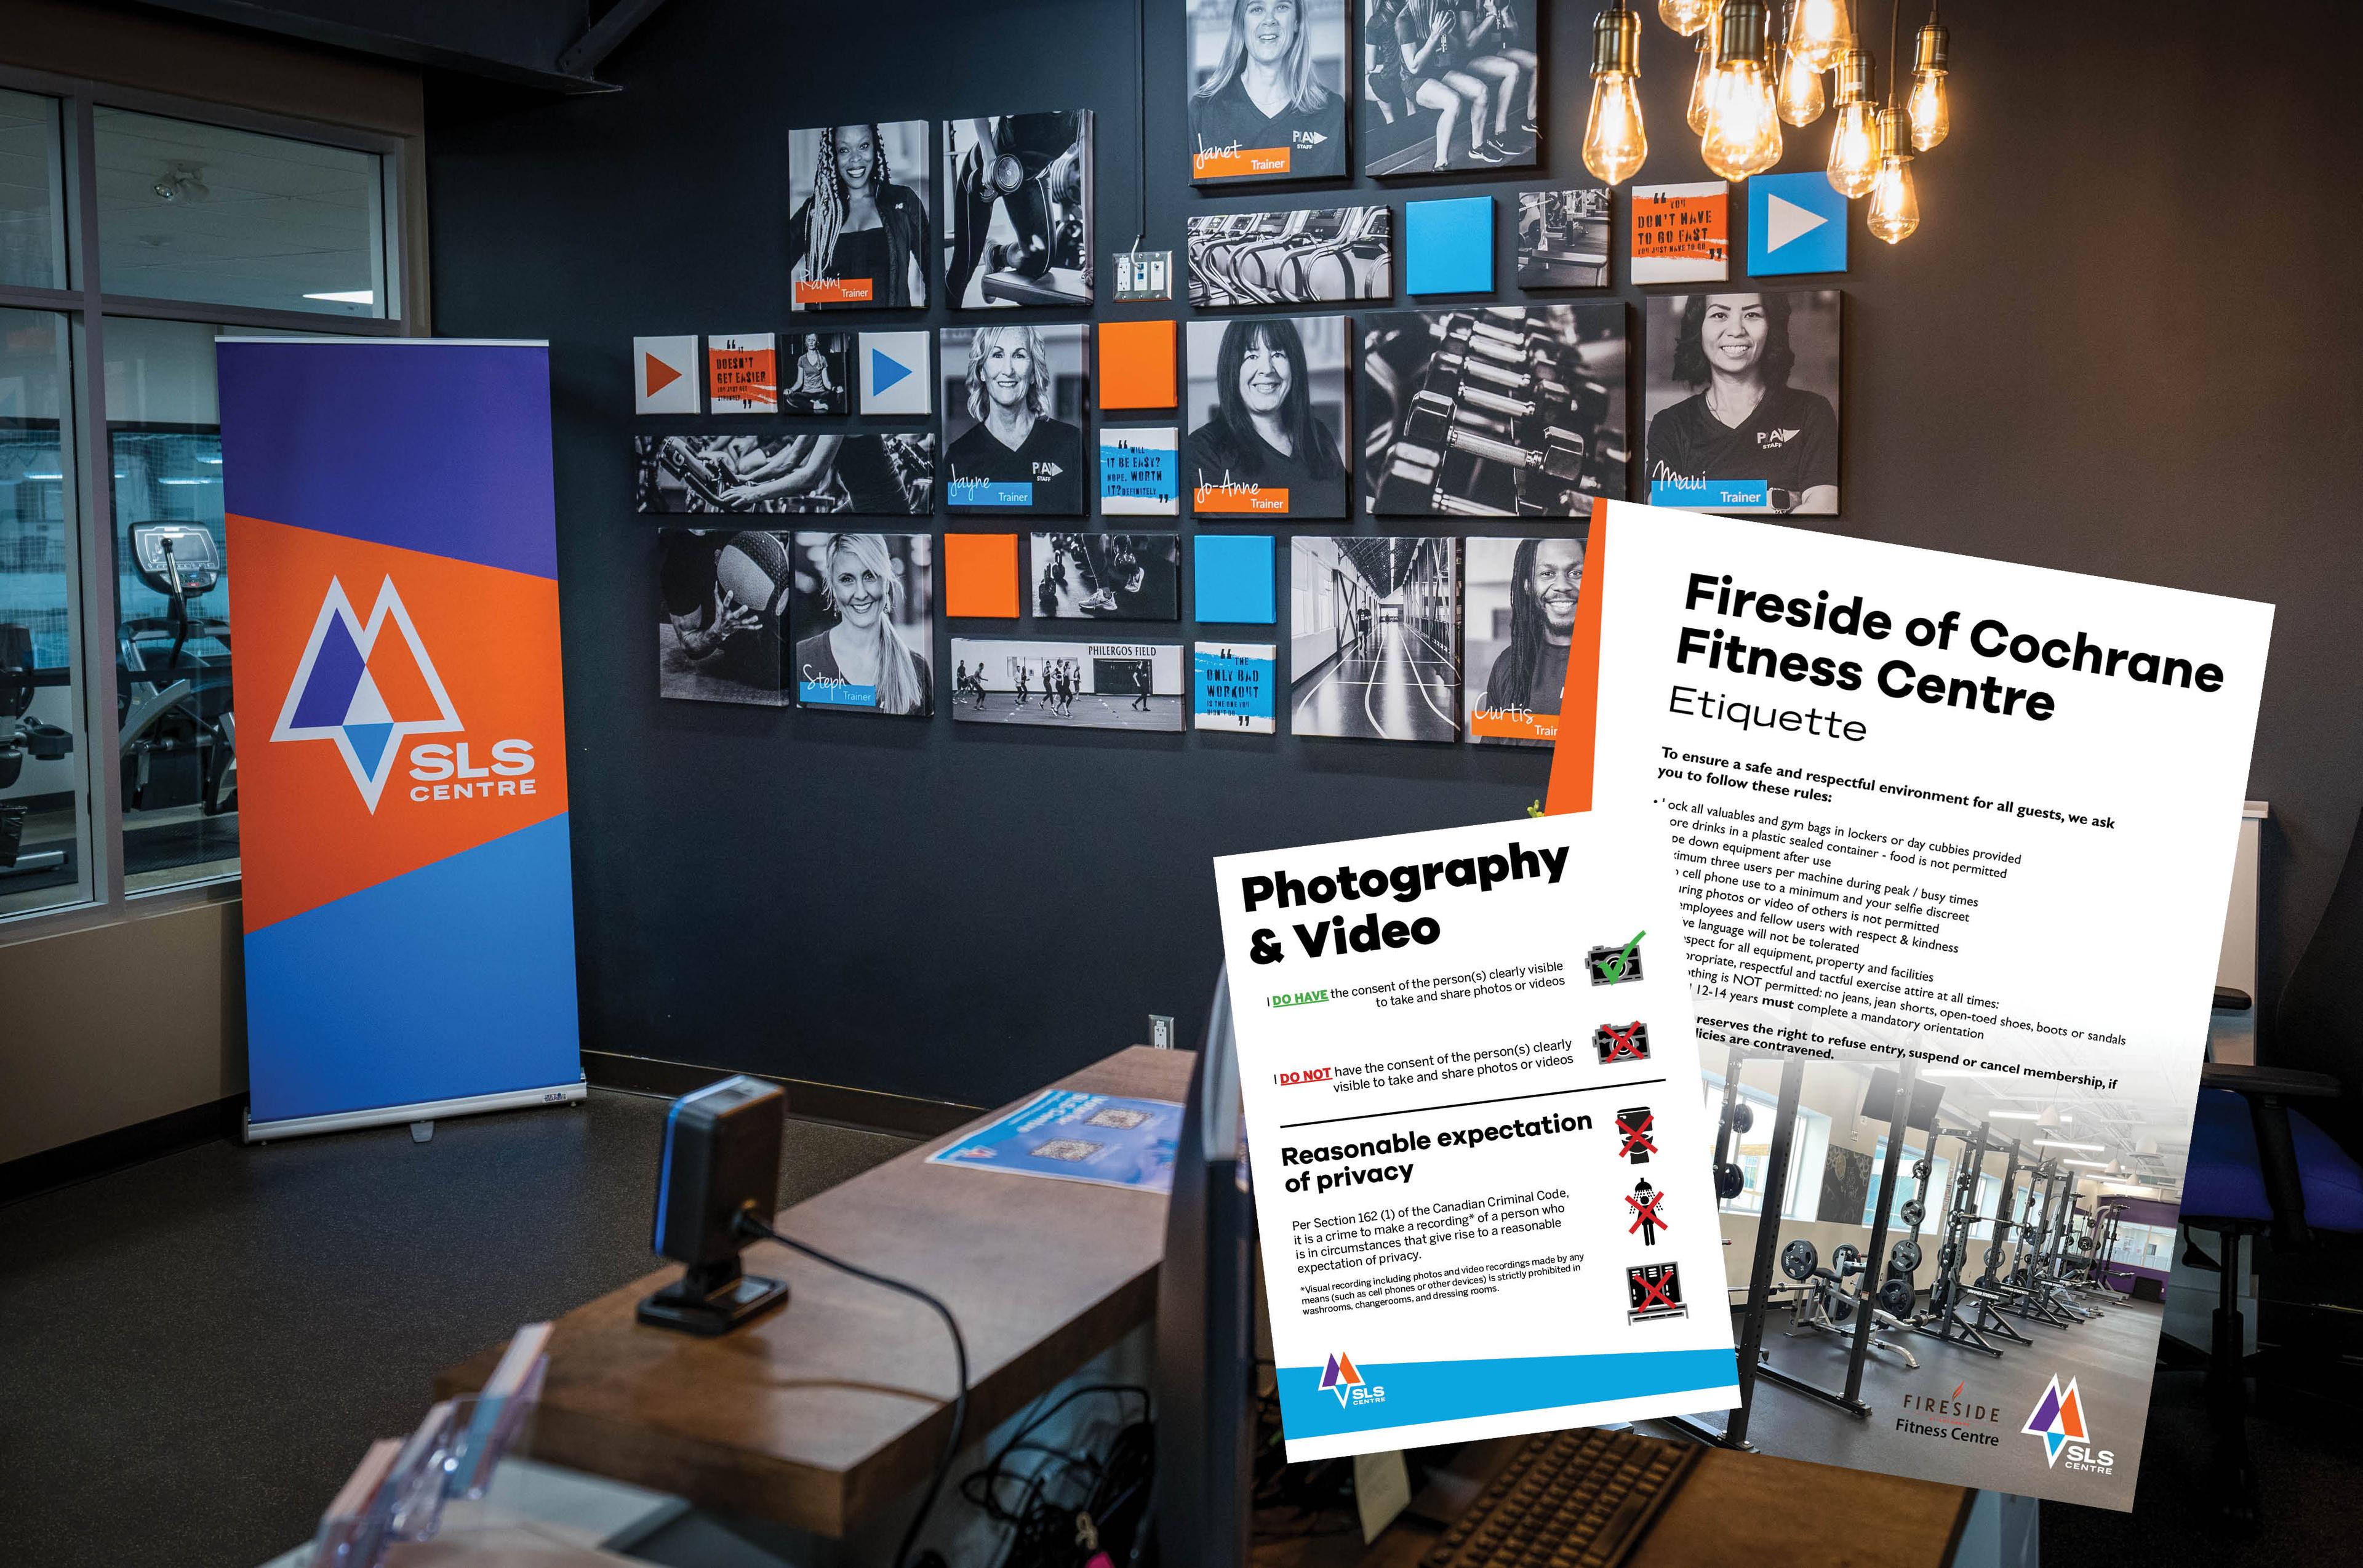 An image of a reception of a fitness centre with canvas' of personal trainers on the wall and an overlay image of Fitness centre etiquettes including photography and video rules.